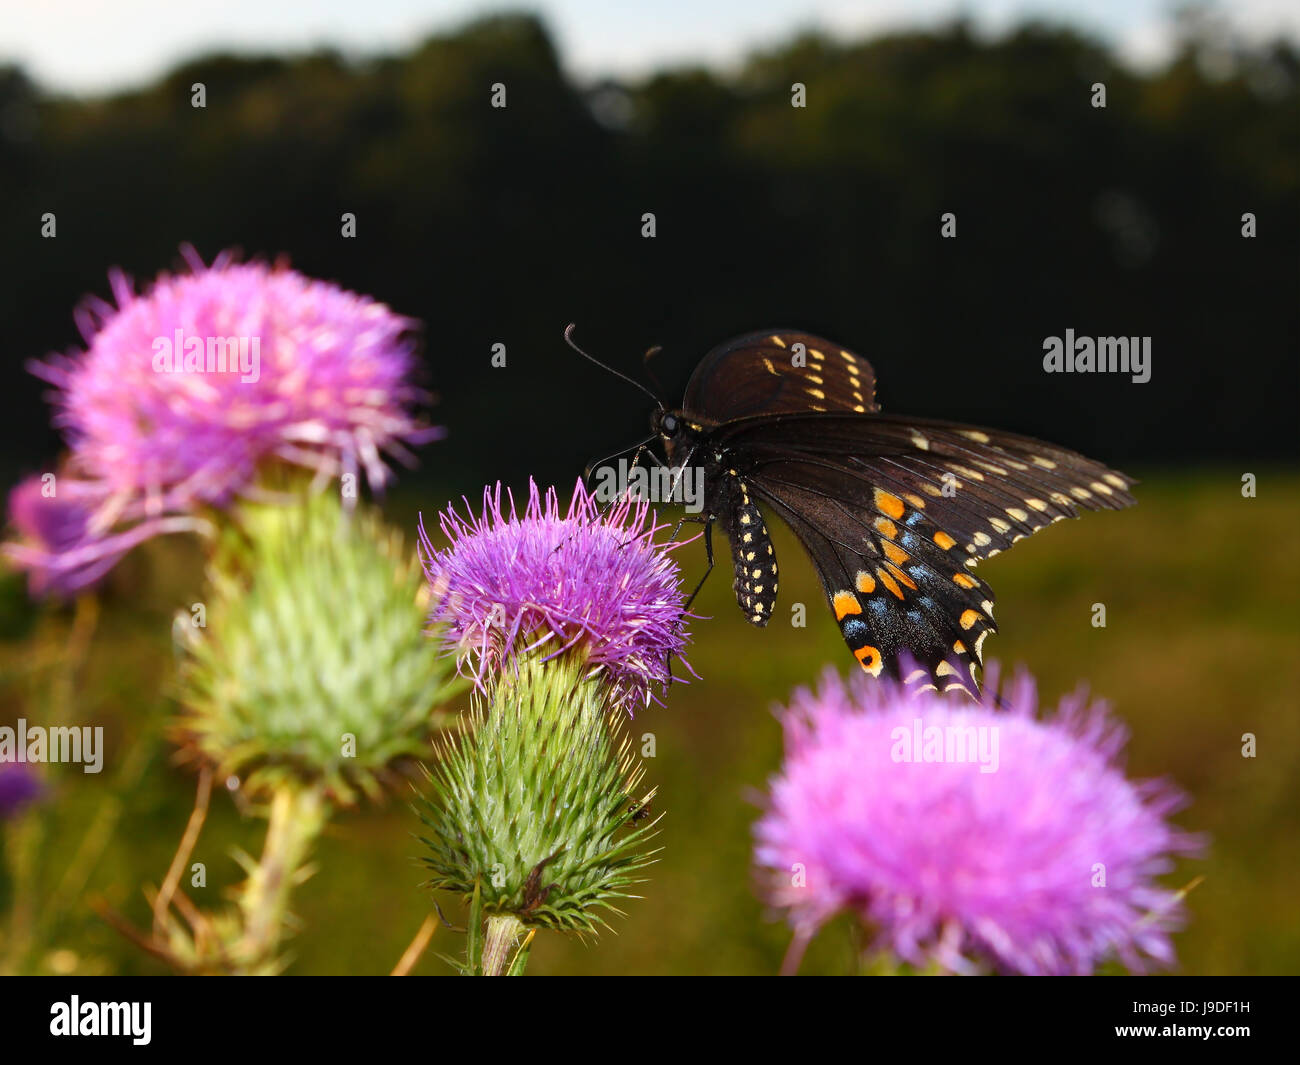 insect, butterfly, black, swarthy, jetblack, deep black, butterflies, Stock Photo